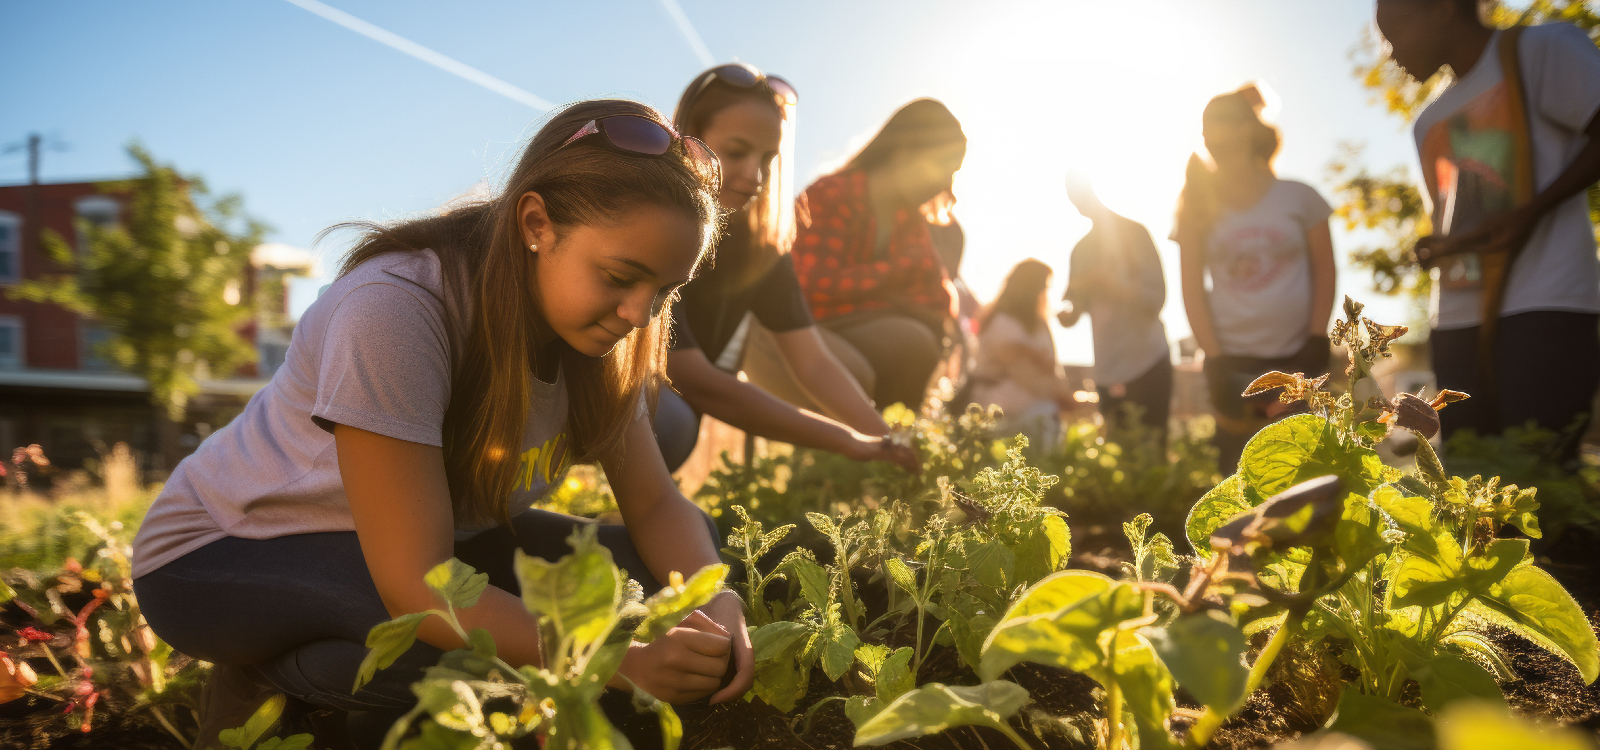 A group of children and teenagers stand by a vegetable patch and plant herbs in the ground.